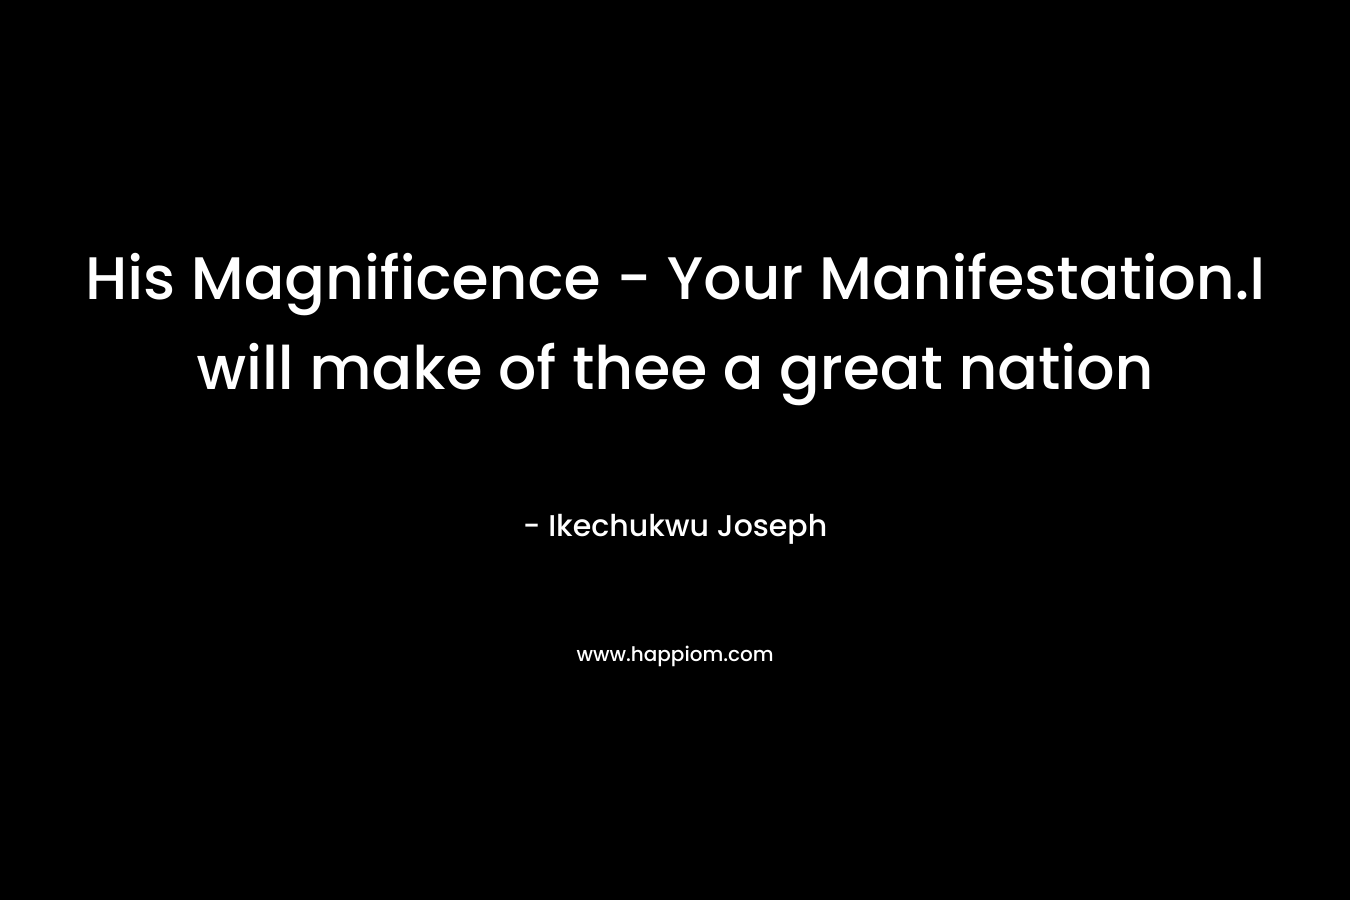 His Magnificence - Your Manifestation.I will make of thee a great nation